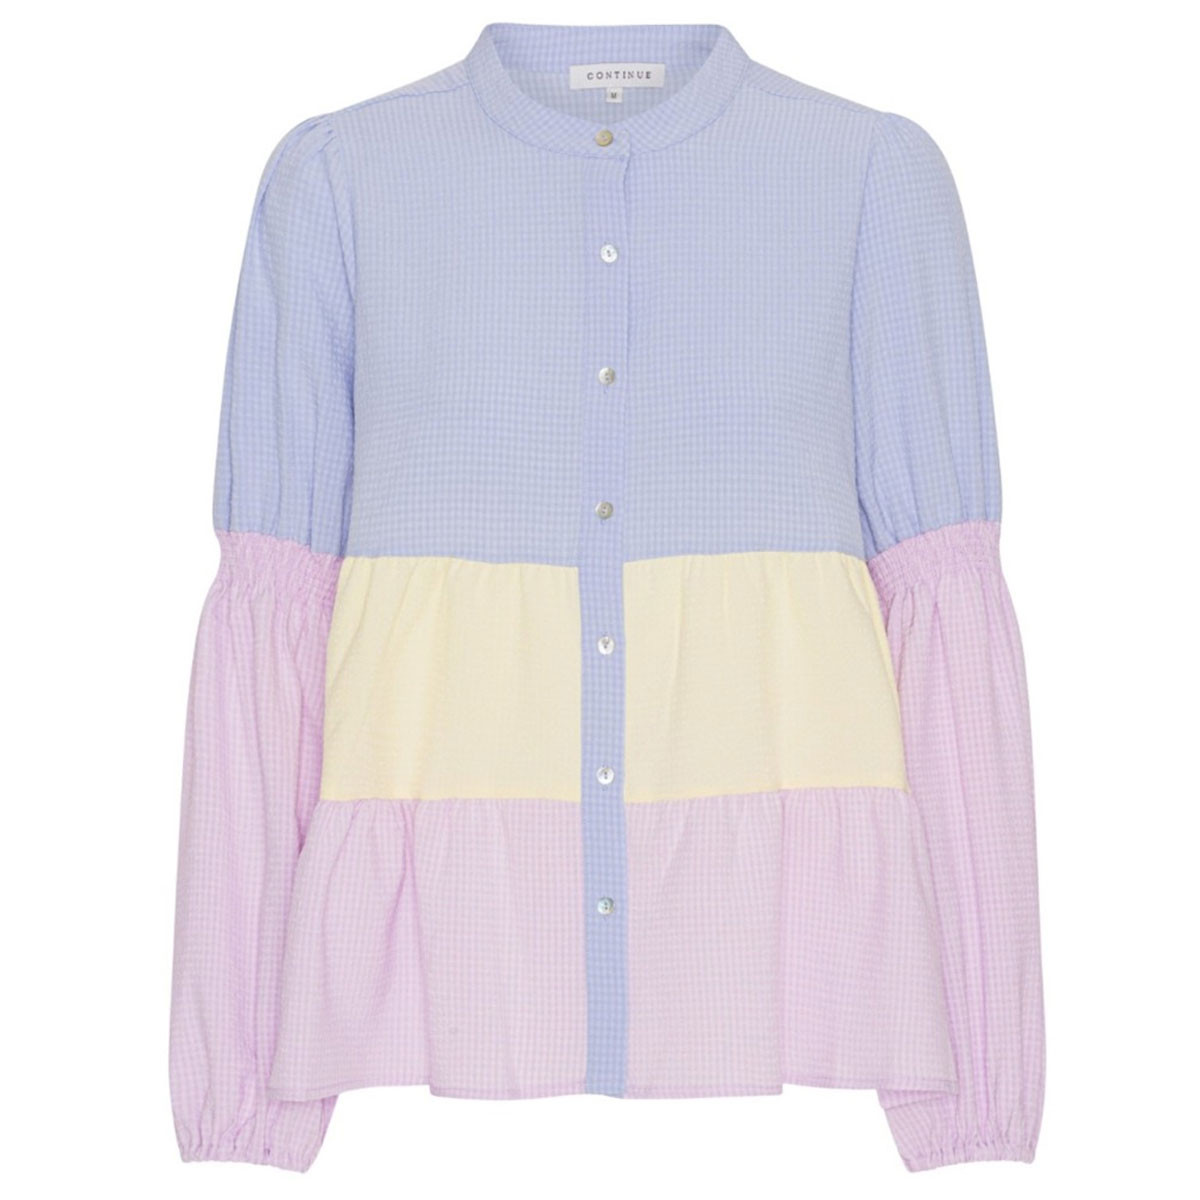 Image of Blue, yellow and purple Sanna blouse 13724 fra Continue, Str. XS (30197-109492)